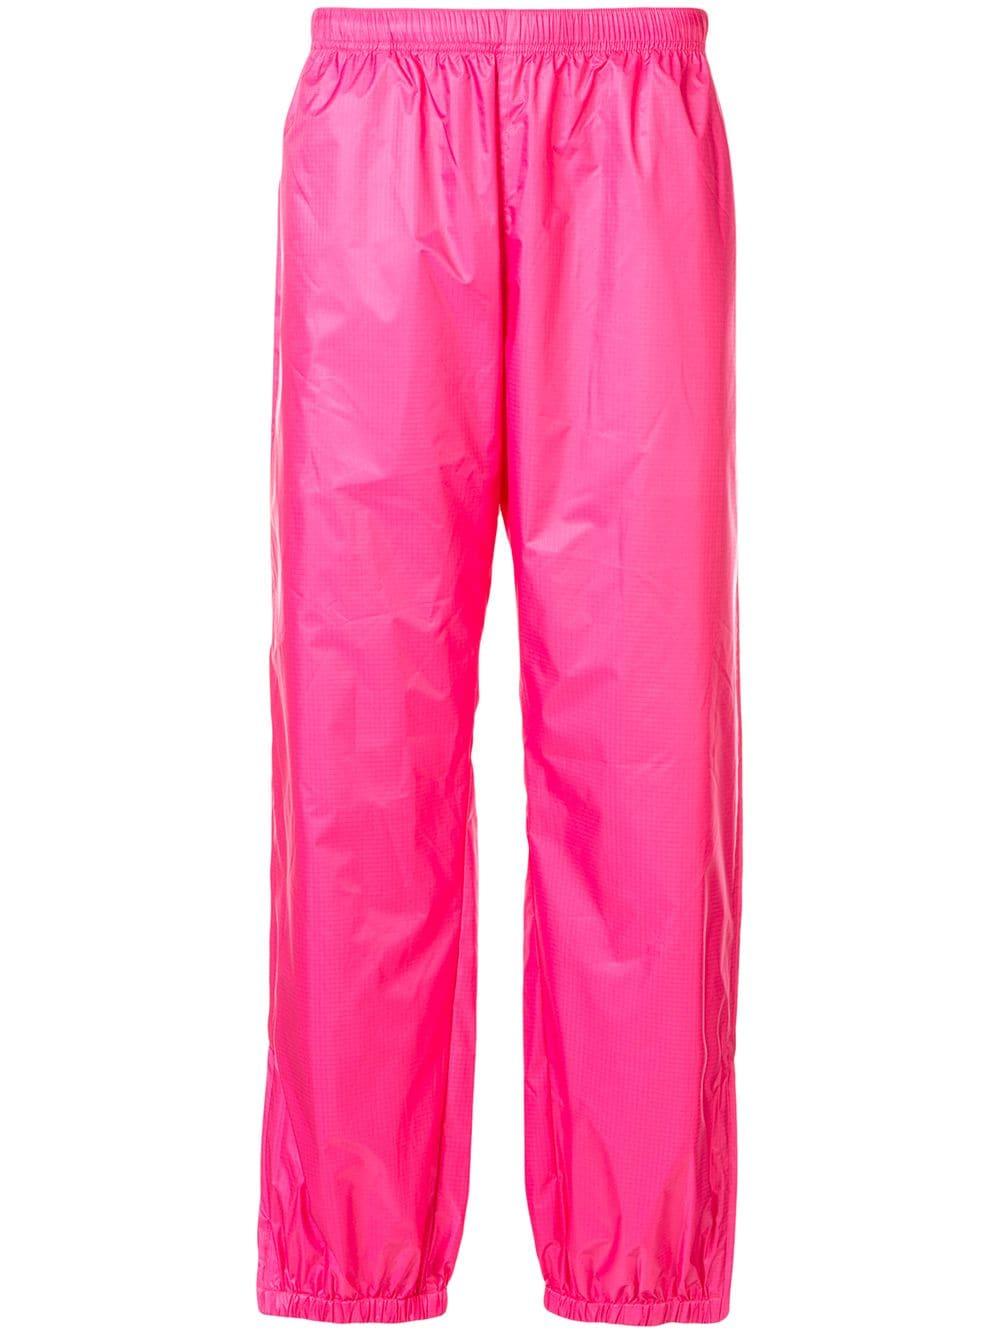 Supreme Packable Ripstop Track Pants in Pink for Men - Lyst